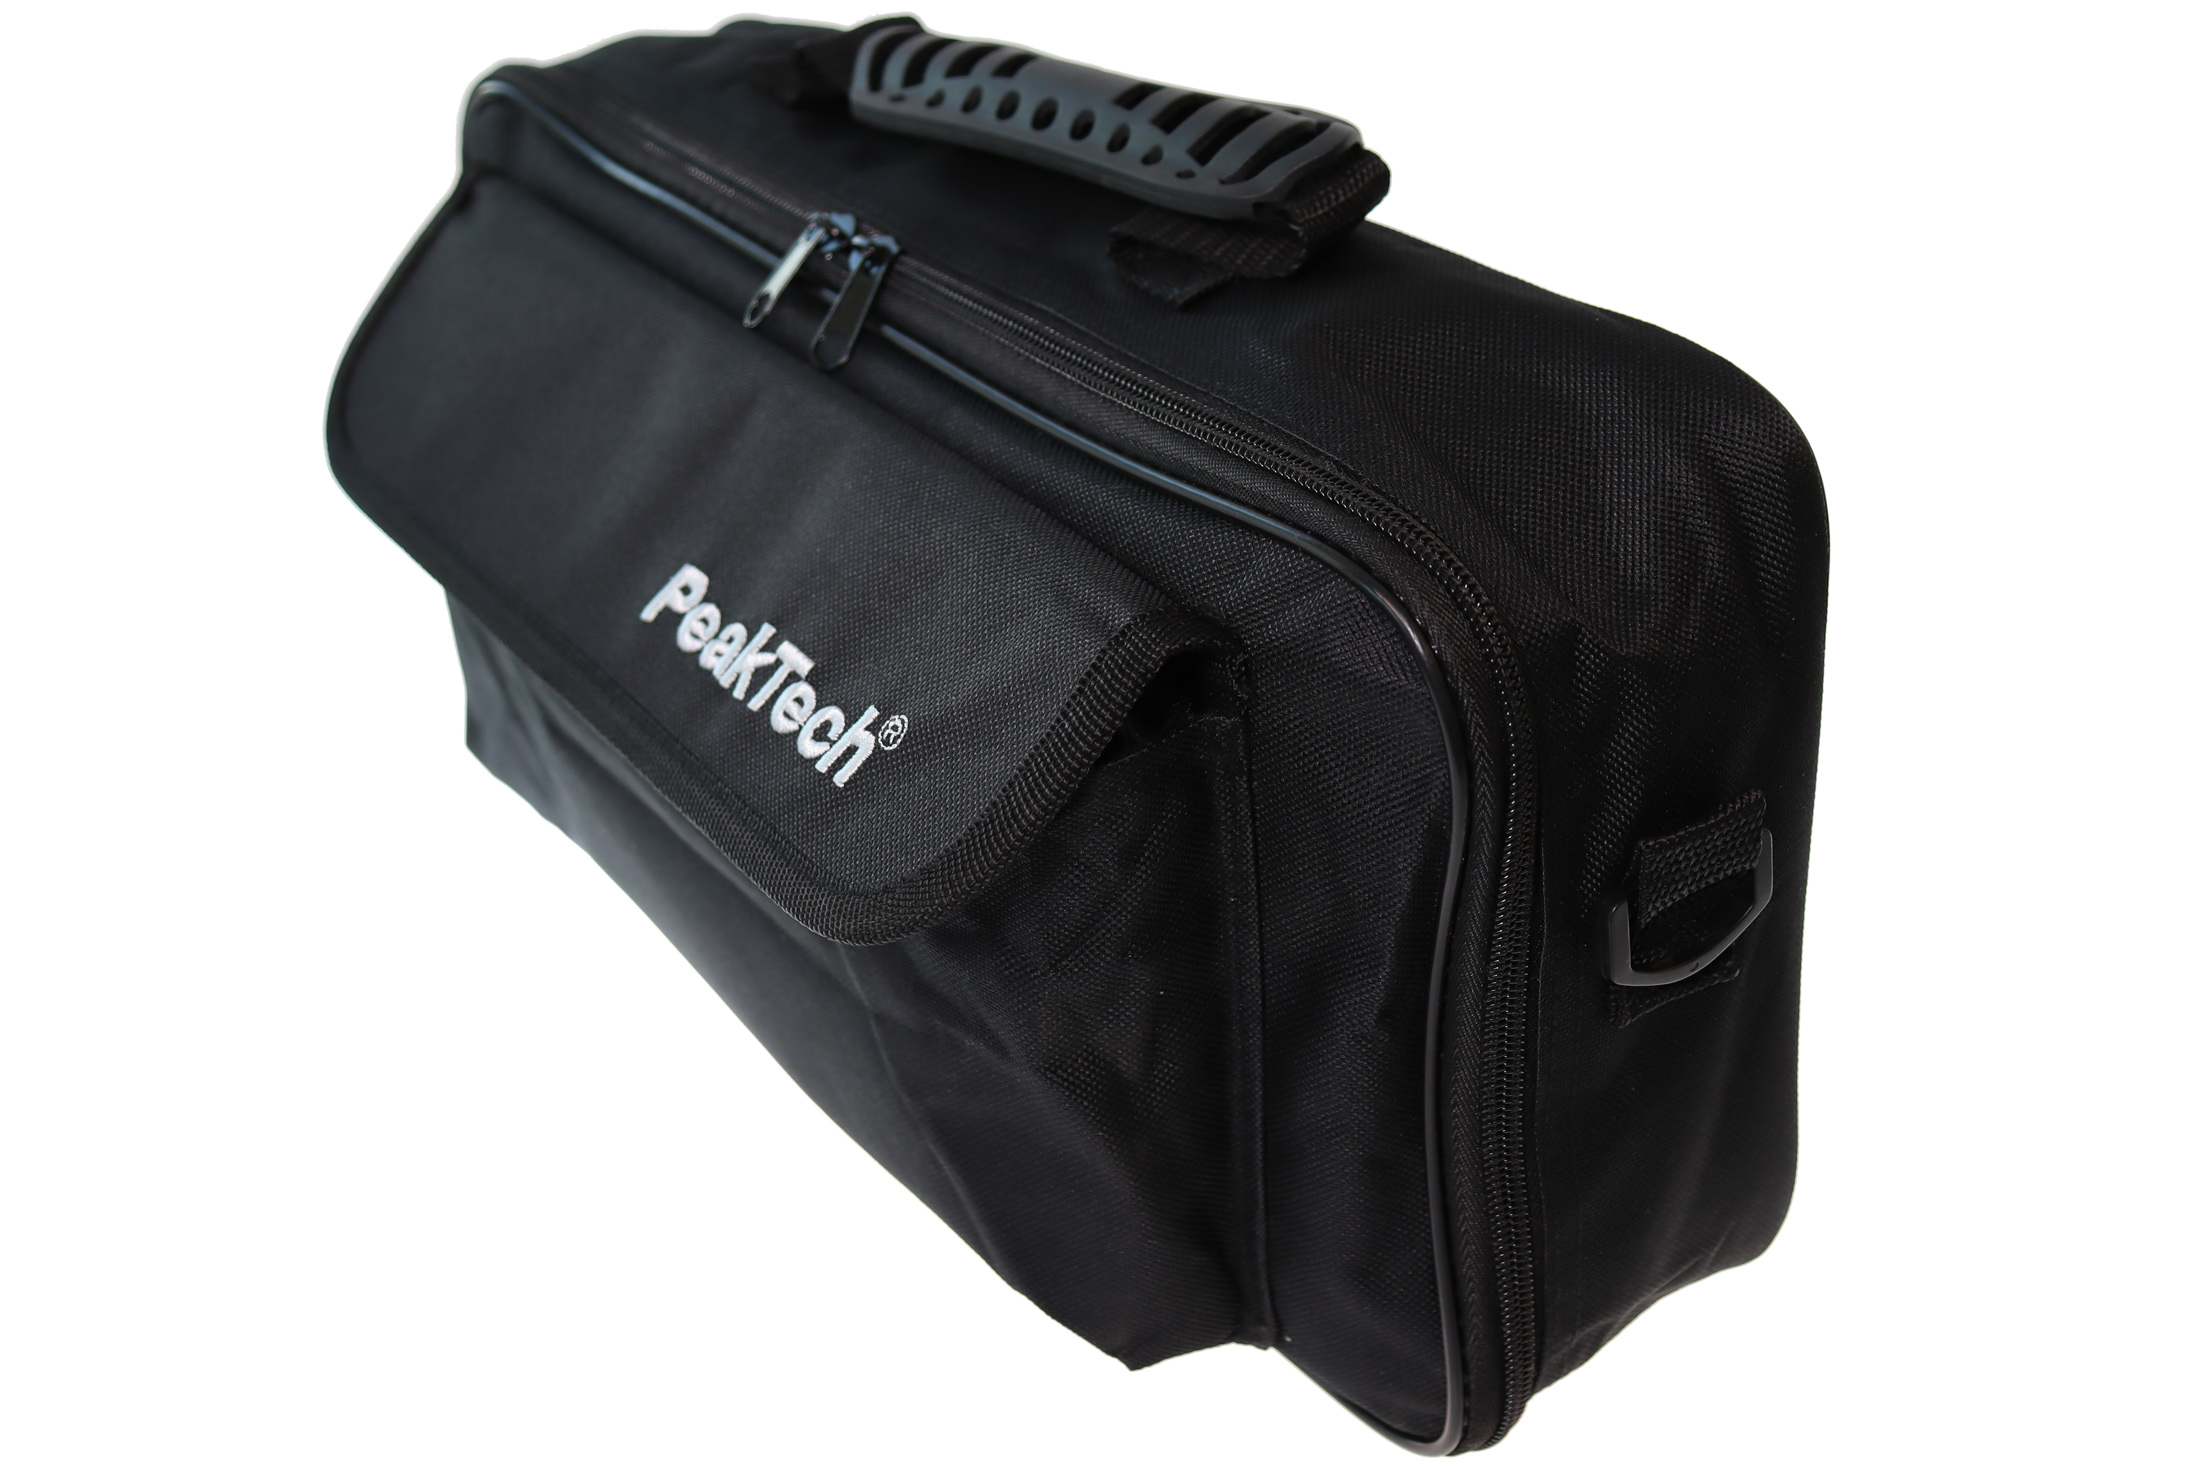 «PeakTech® P 7400» Carrying case for oscilloscopes